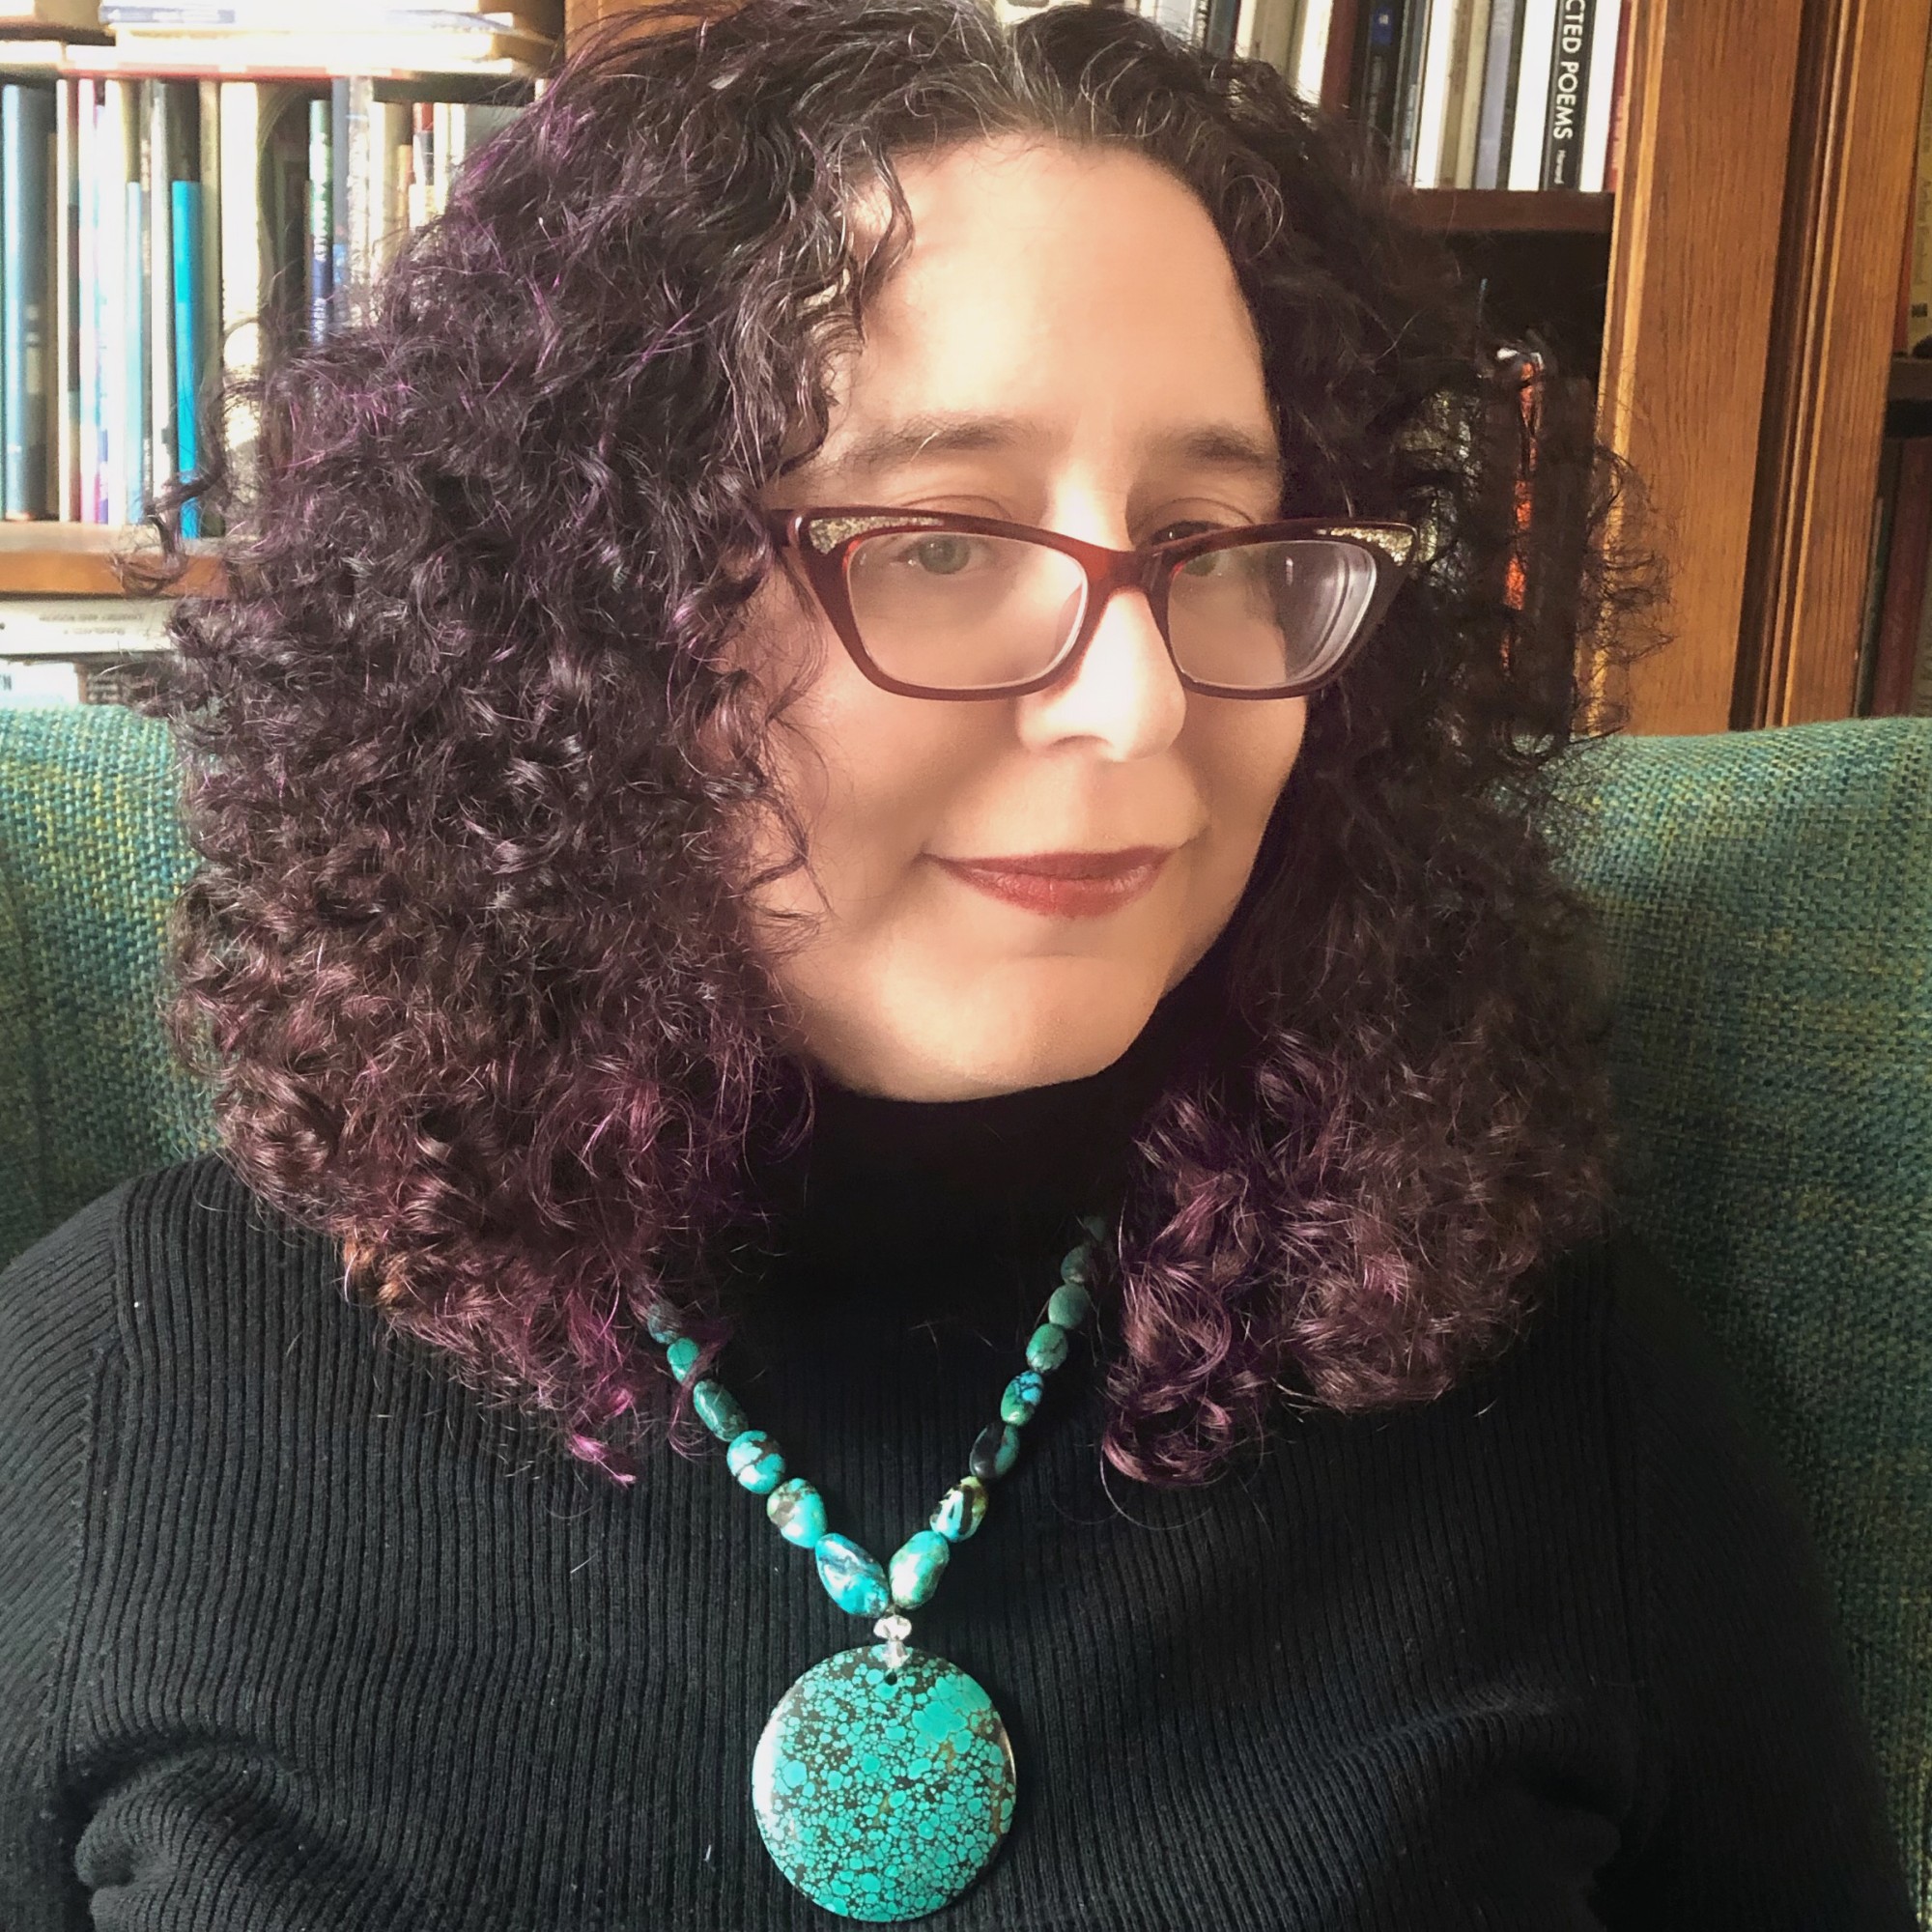 Joanna Fuhrman sits in a green chair, wearing a black turtleneck and large turquoise necklace